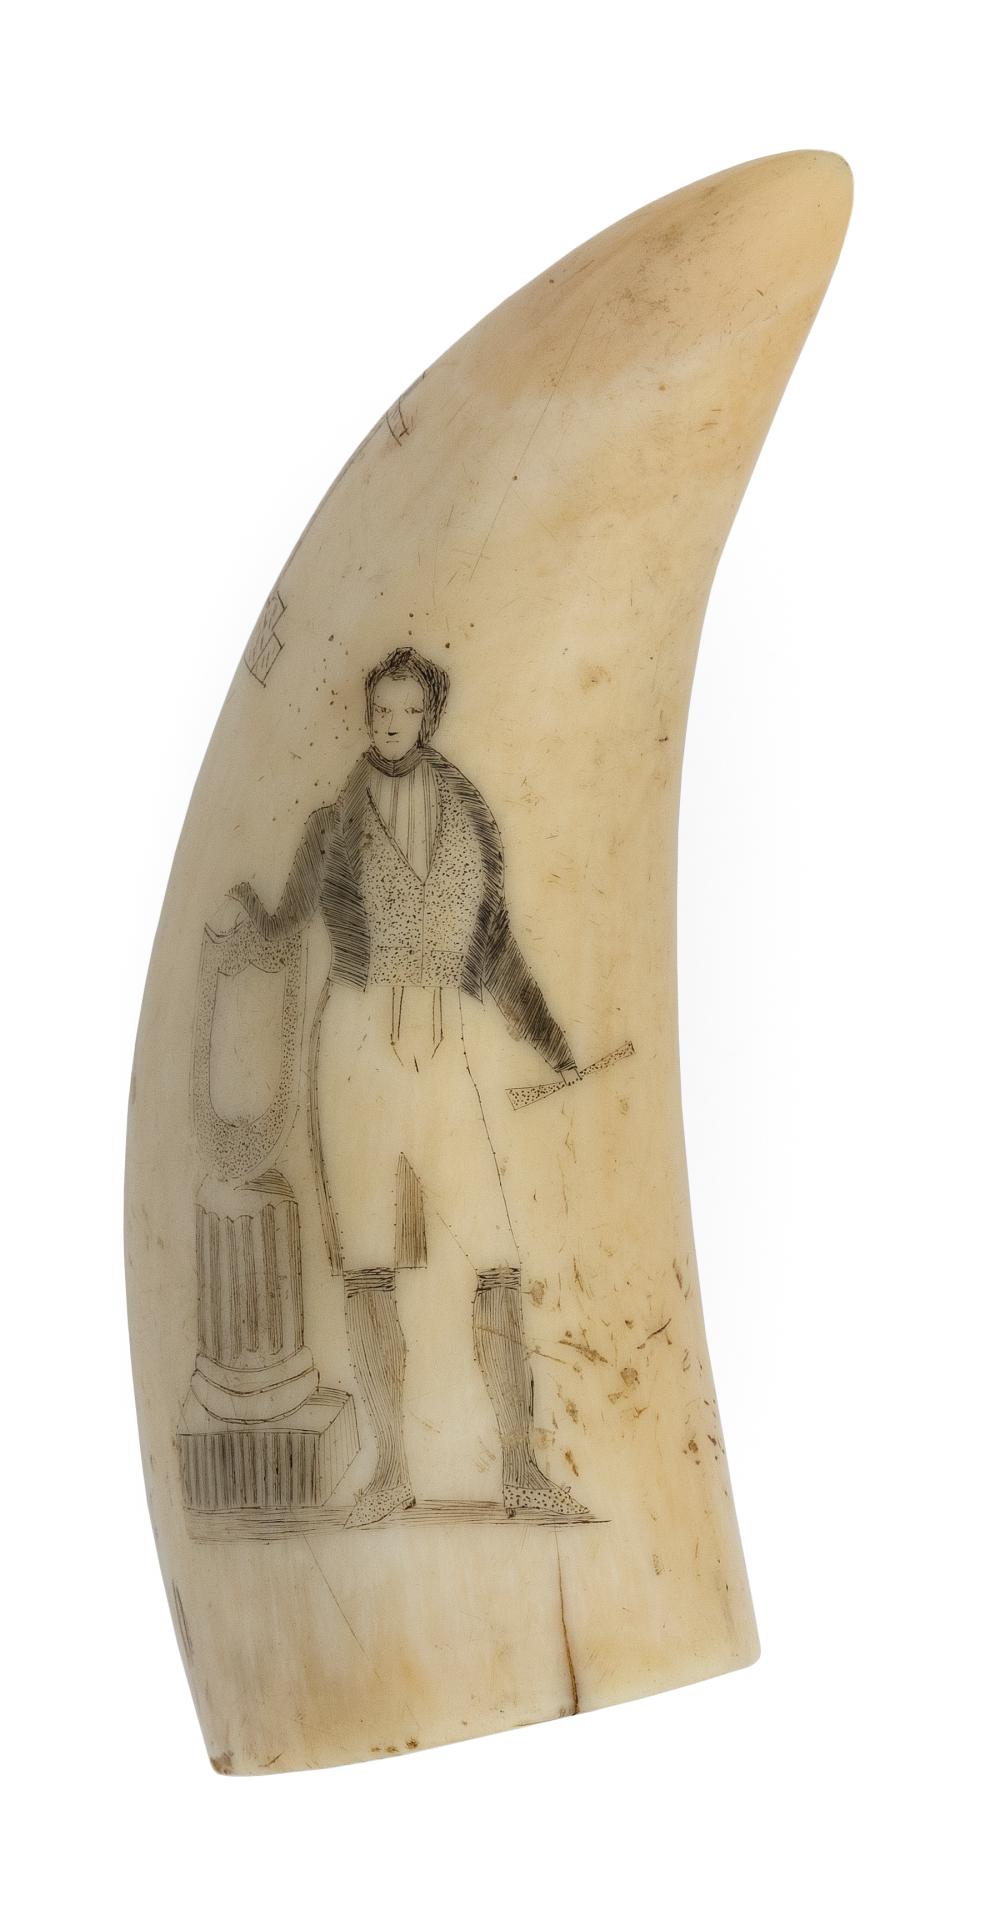 SCRIMSHAW WHALE S TOOTH WITH SEVERAL 350156